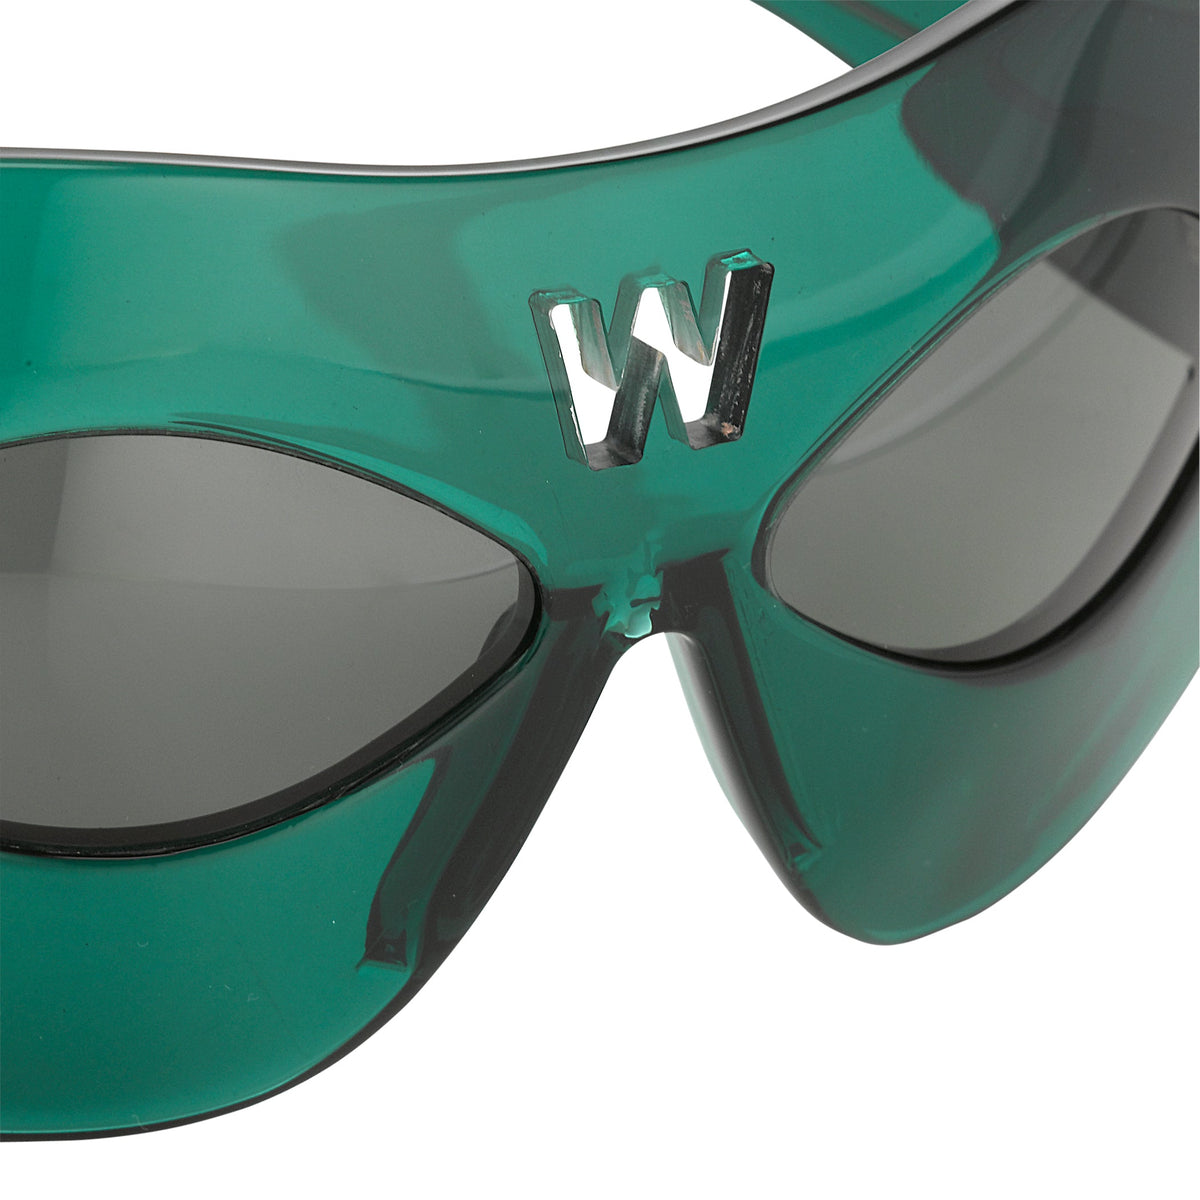 What Kind of Sunglasses Does Walter White Wear? ⋆ Halloween Inspiration